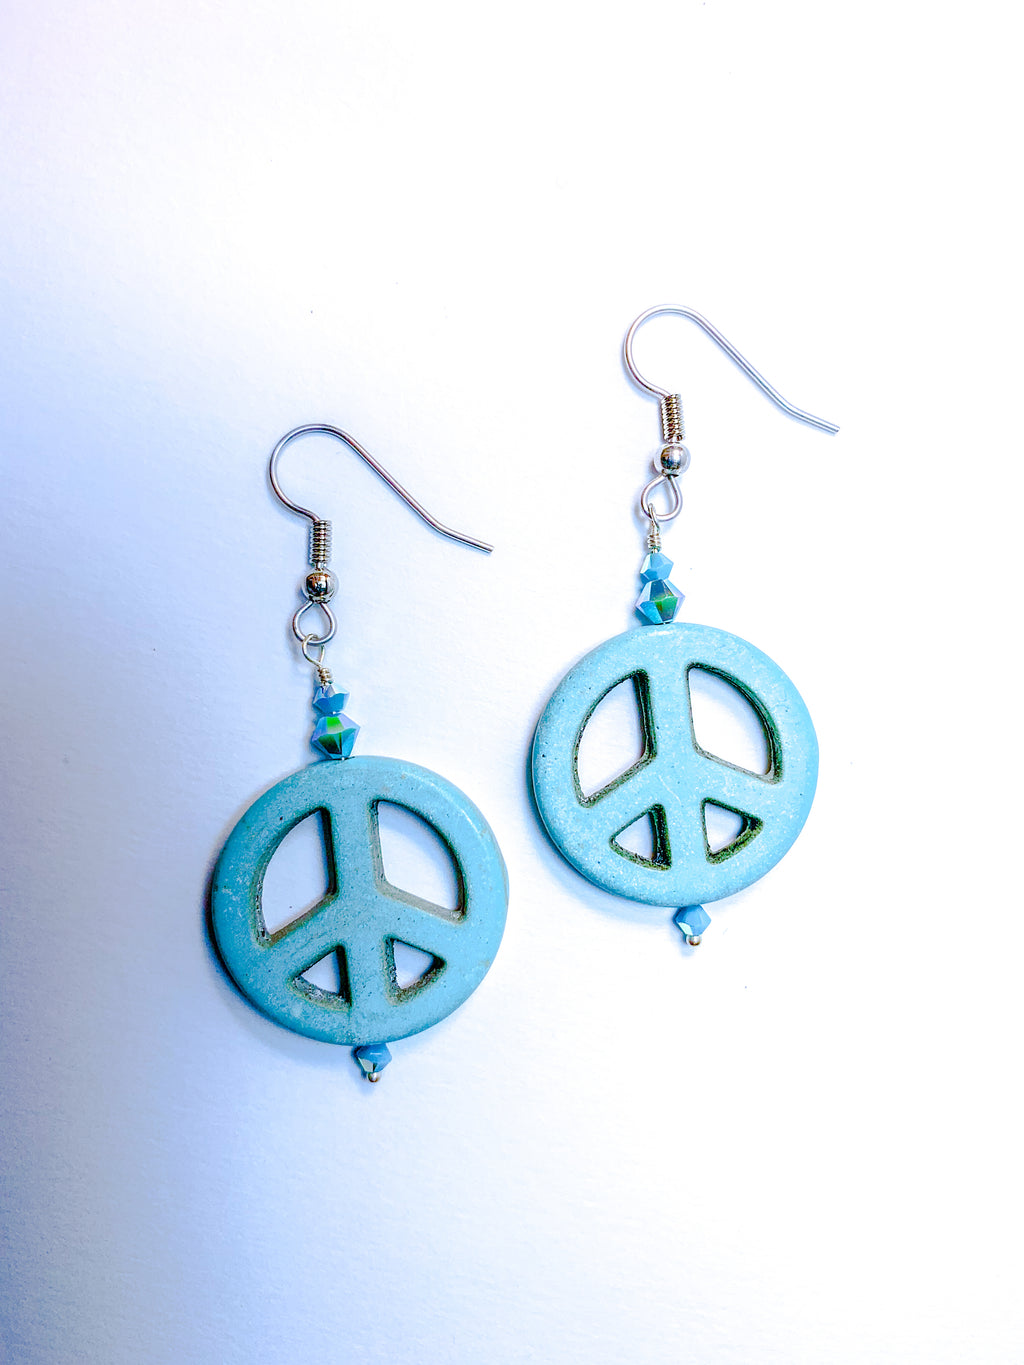 Turquoise colored peace charm and crystal earrings